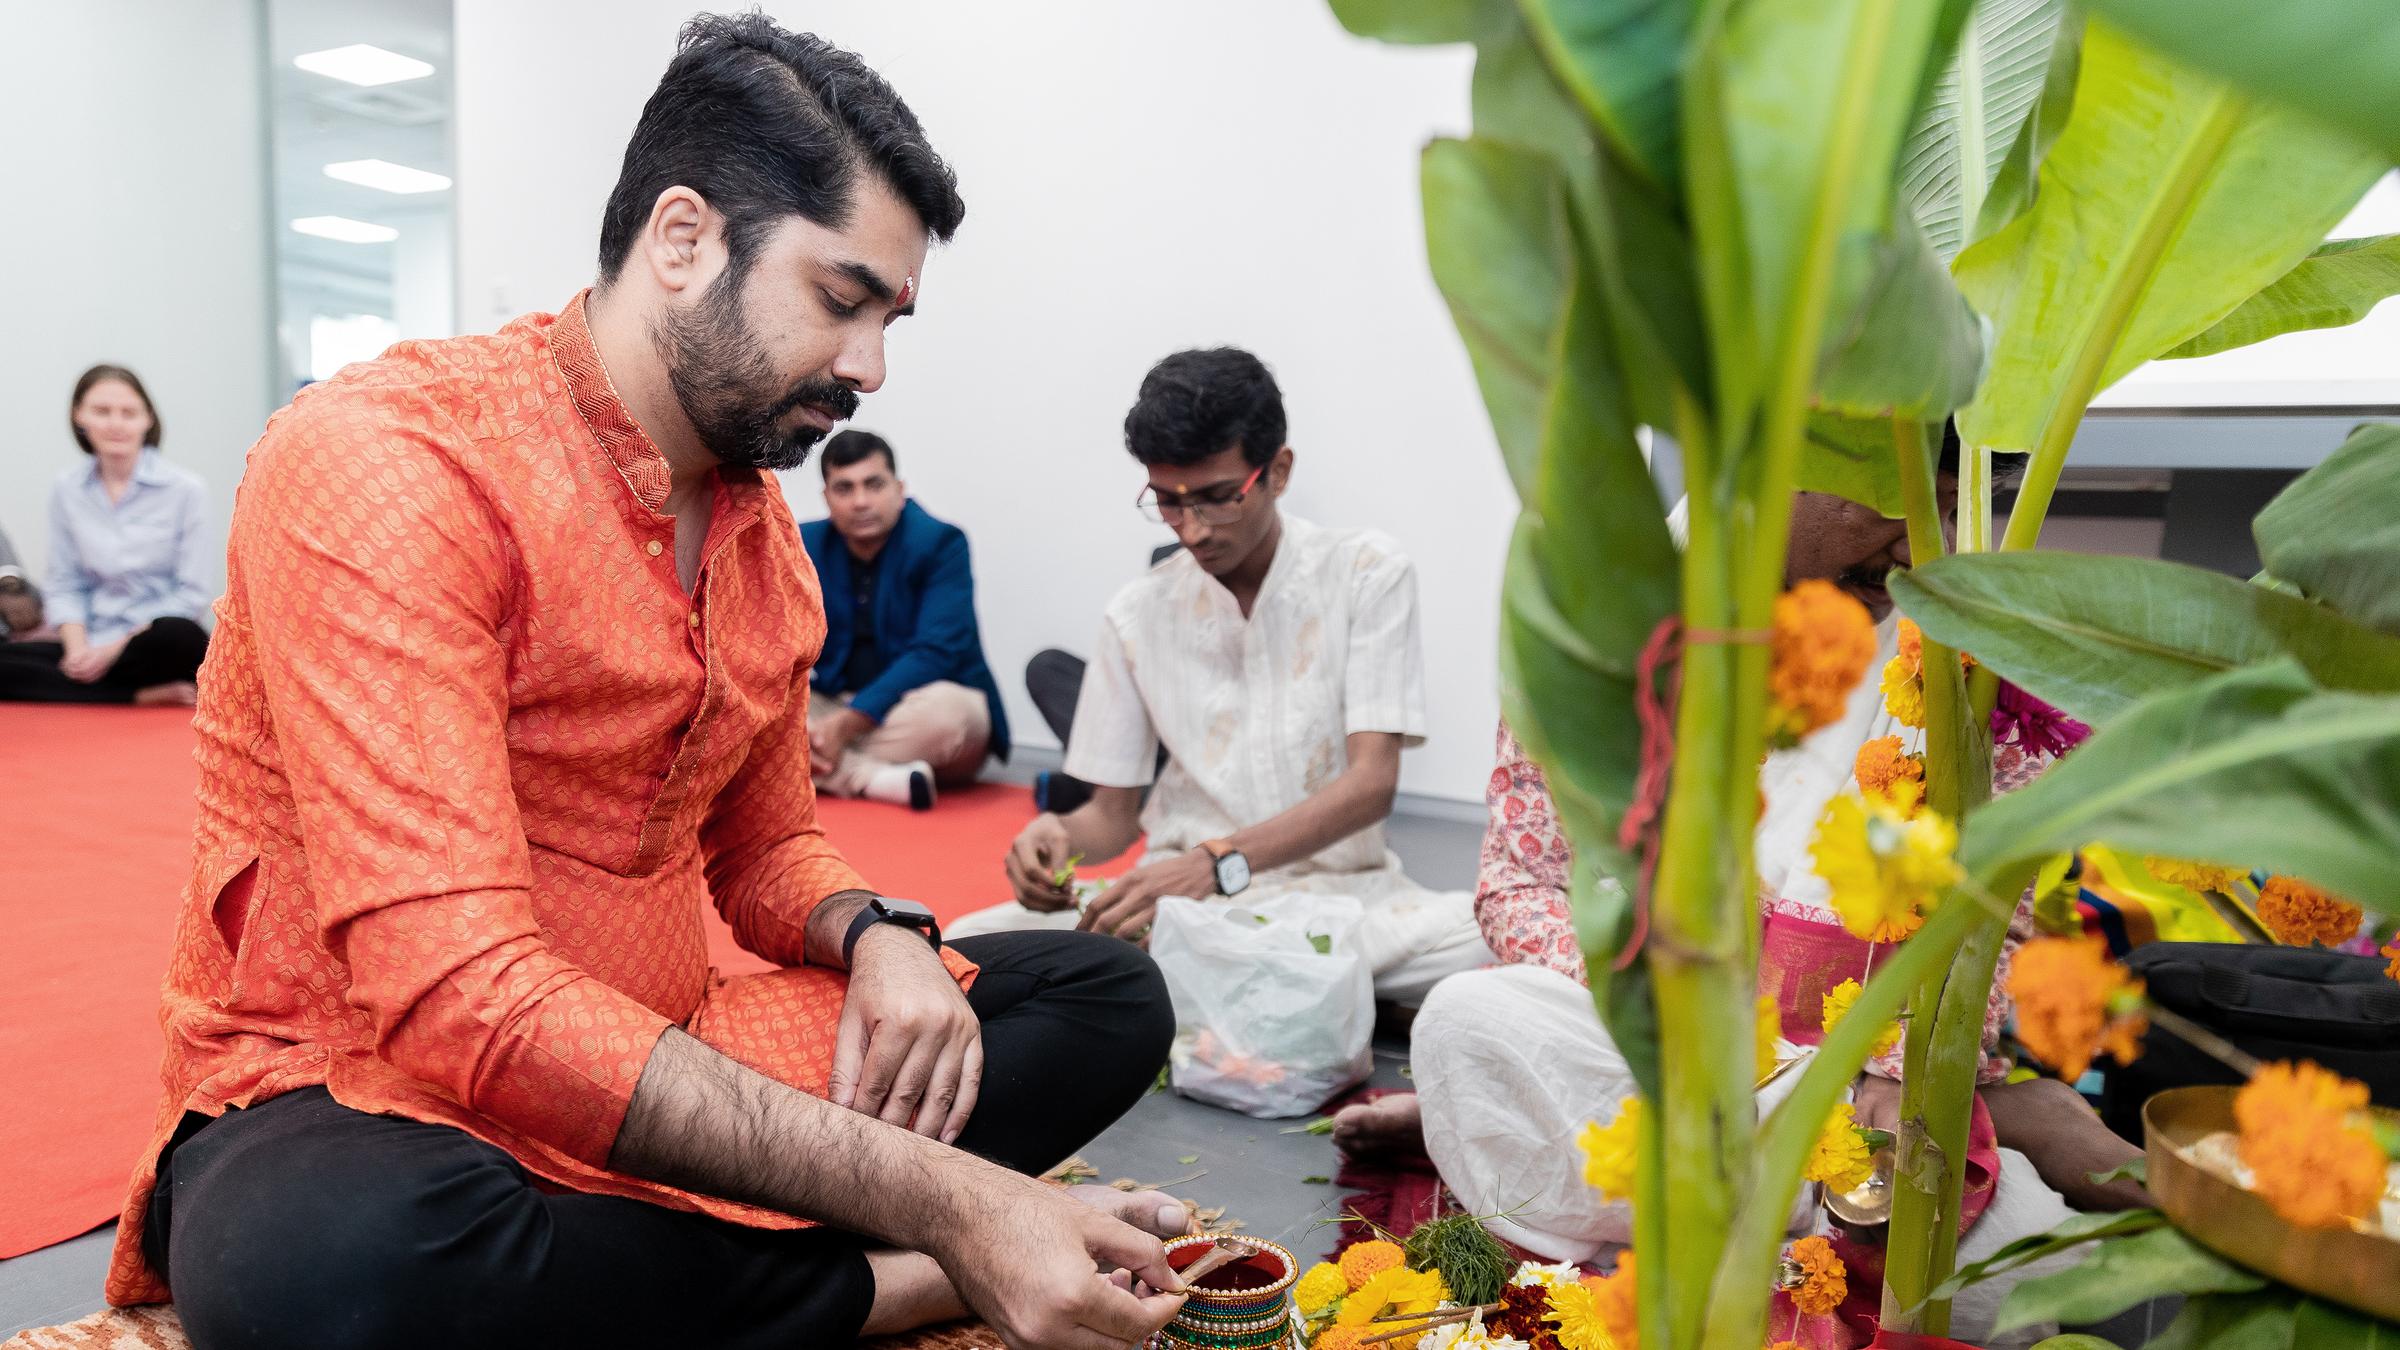 Puja ritual  in the Hamiton Medical India office